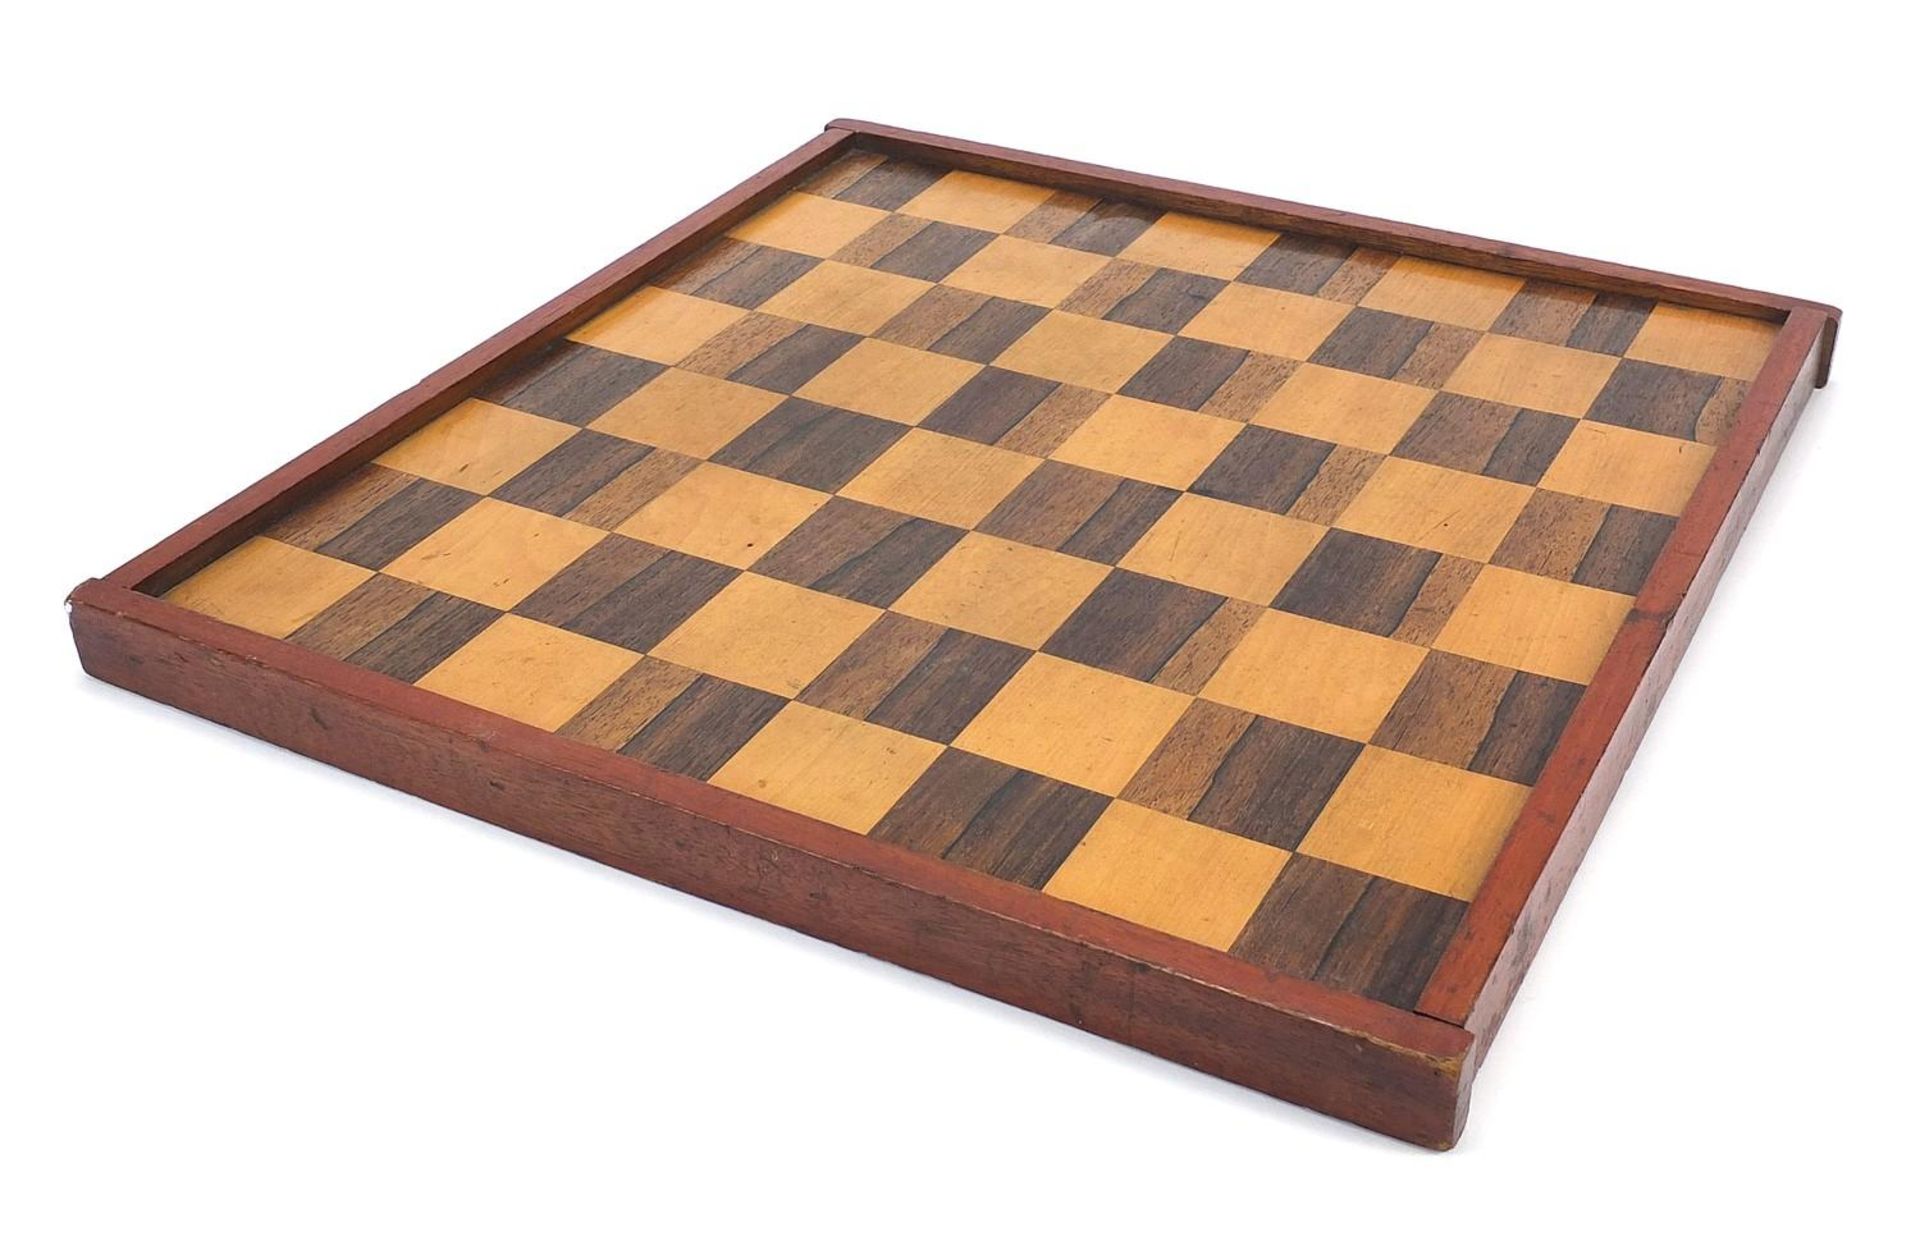 Victorian Mahogany rosewood and boxwood chess board, 45.5cm x 46cm